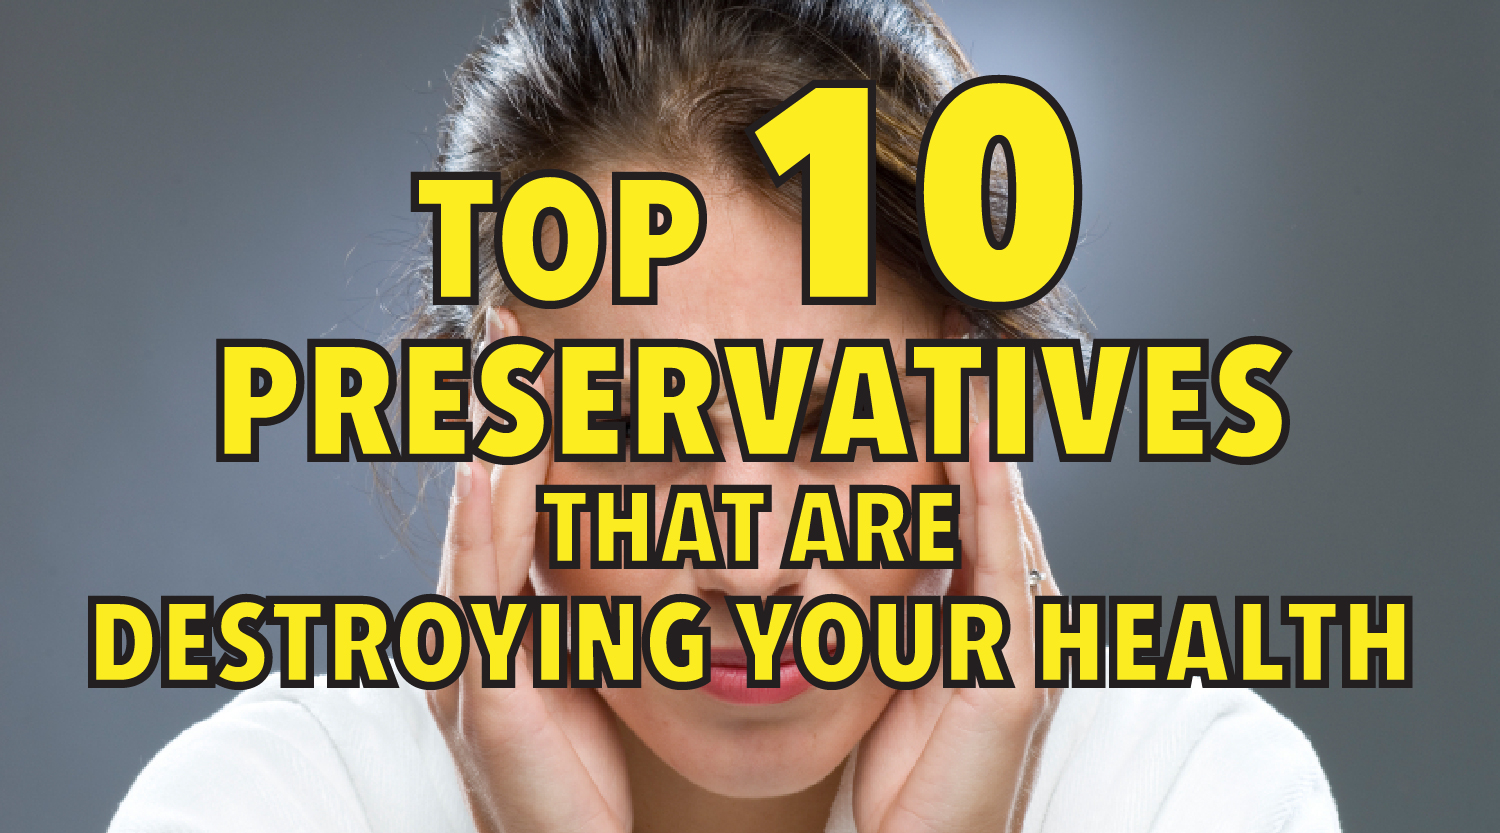 Top 10 preservatives that are destroying your health